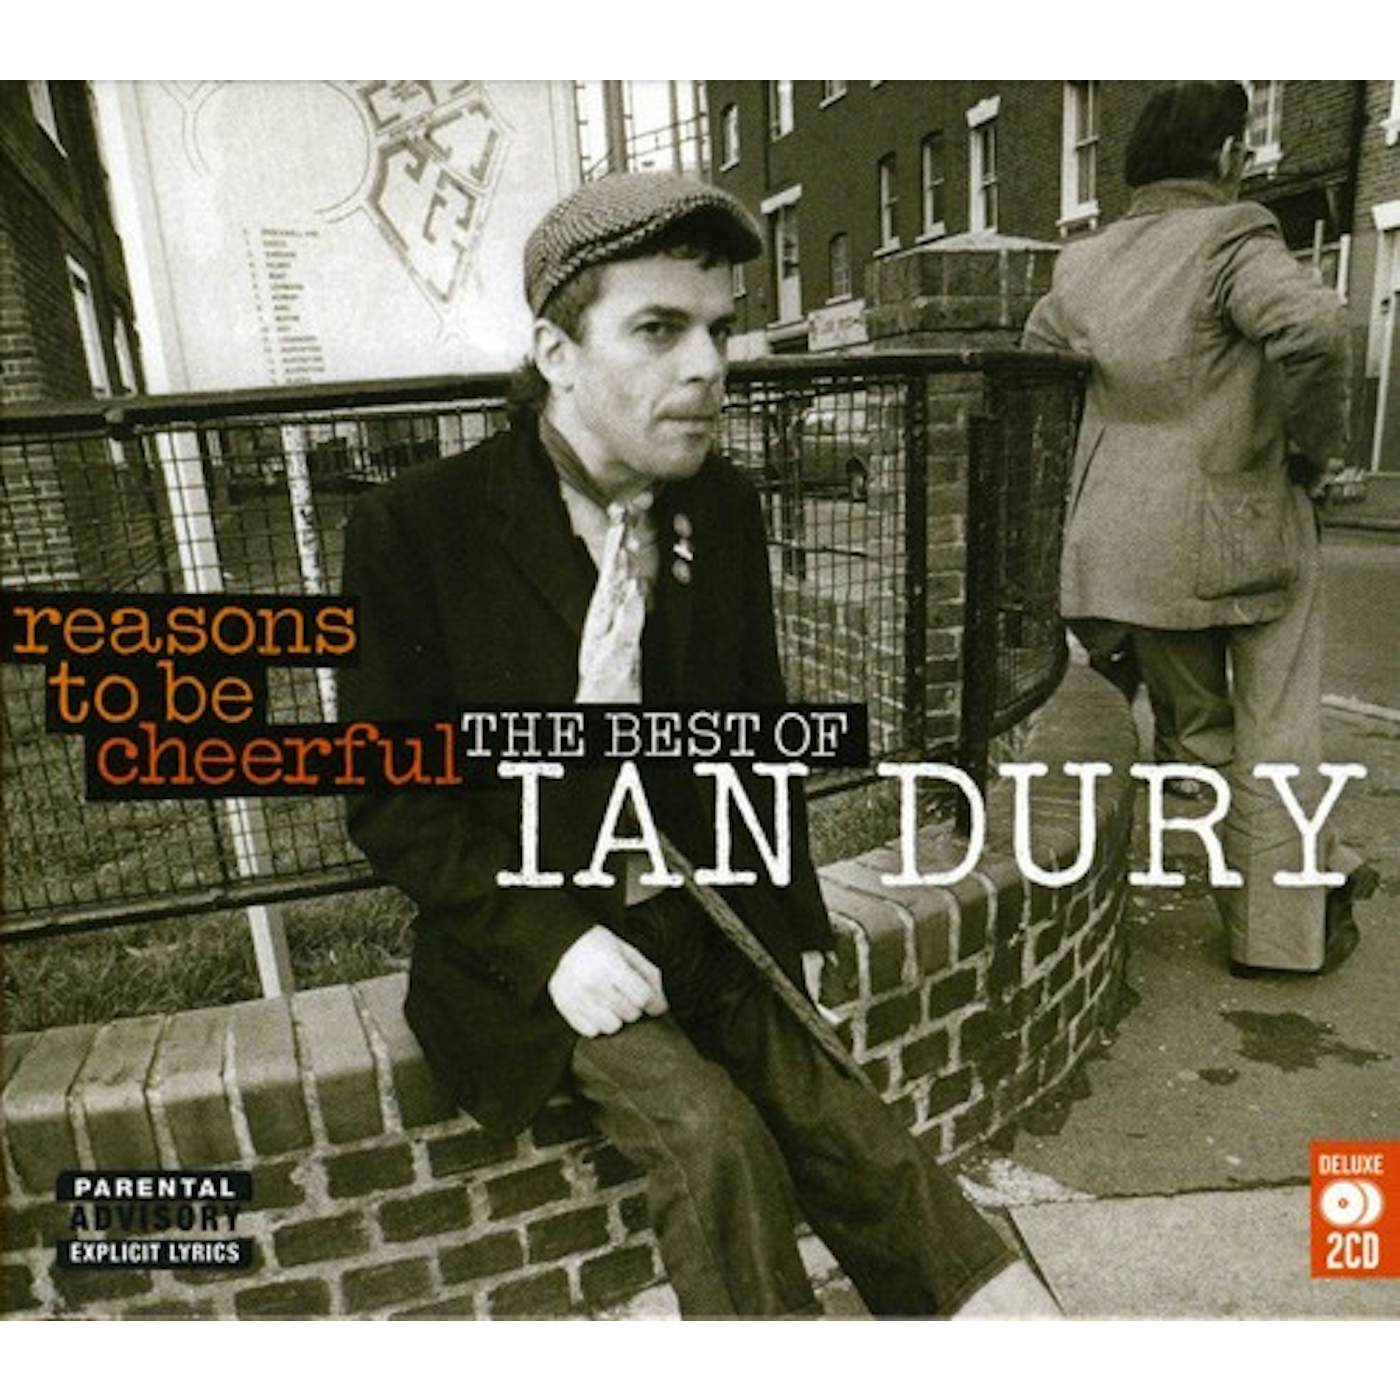 Ian Dury REASONS TO BE CHEERFUL: BEST OF CD